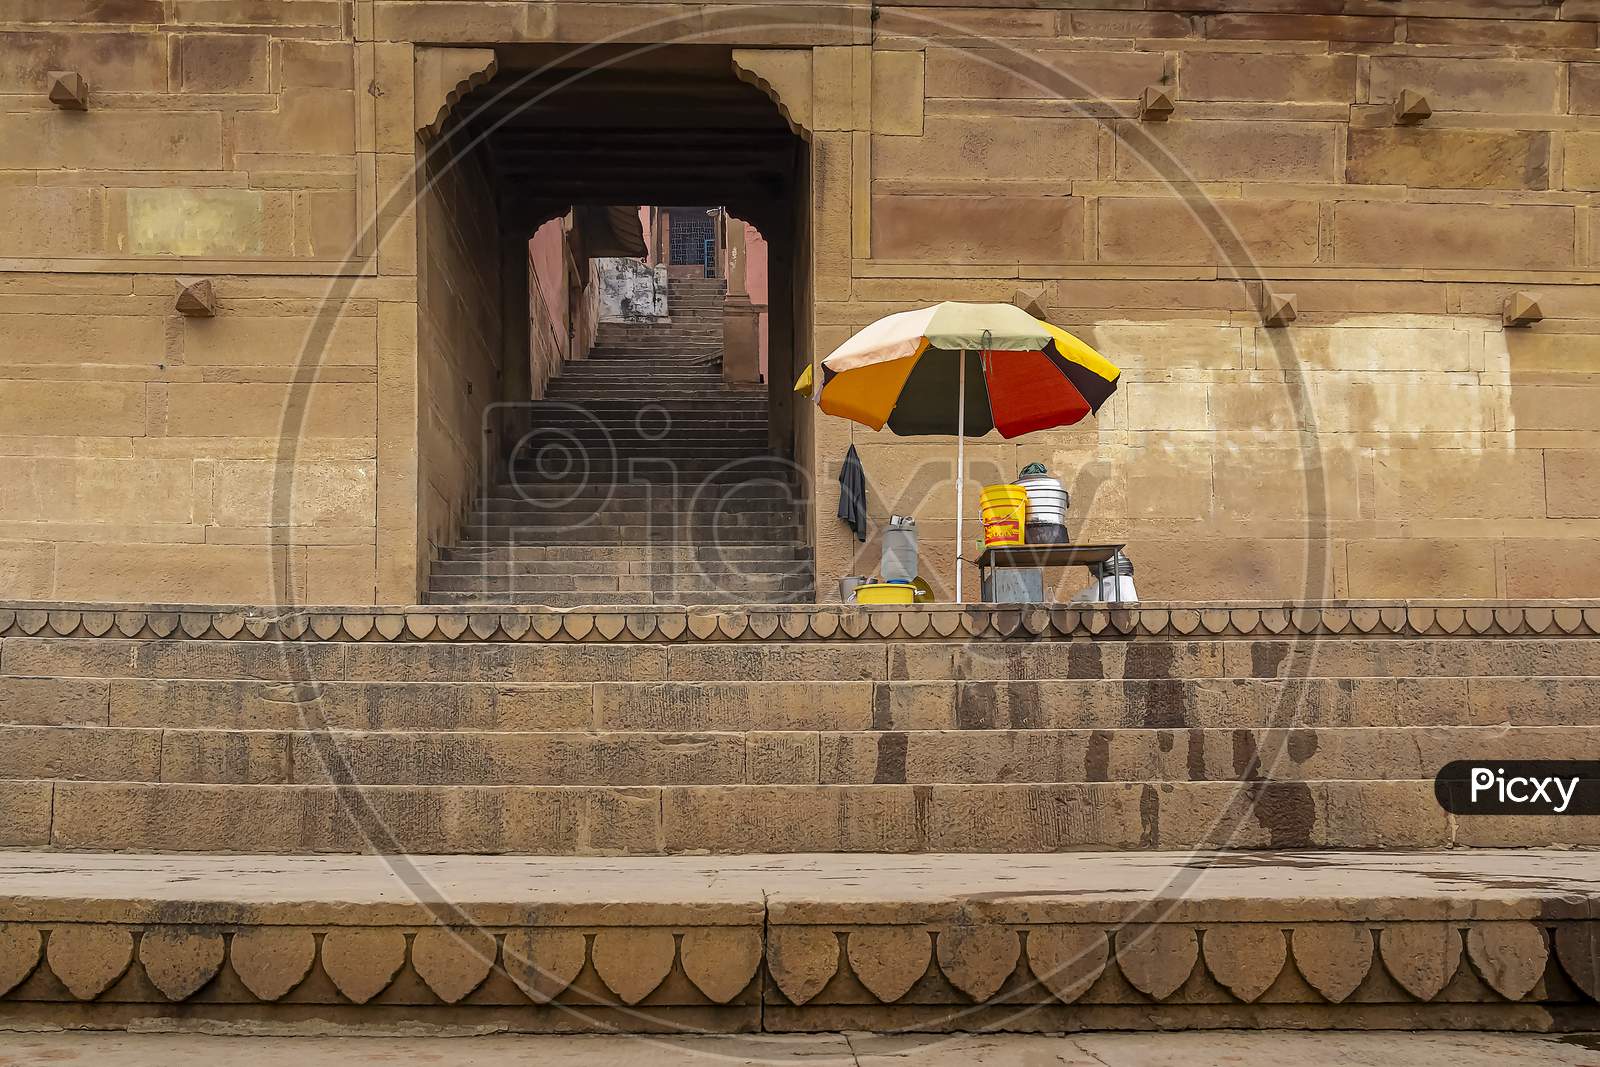 A food trader at a temple entrance on the banks of the holy River Ganges.